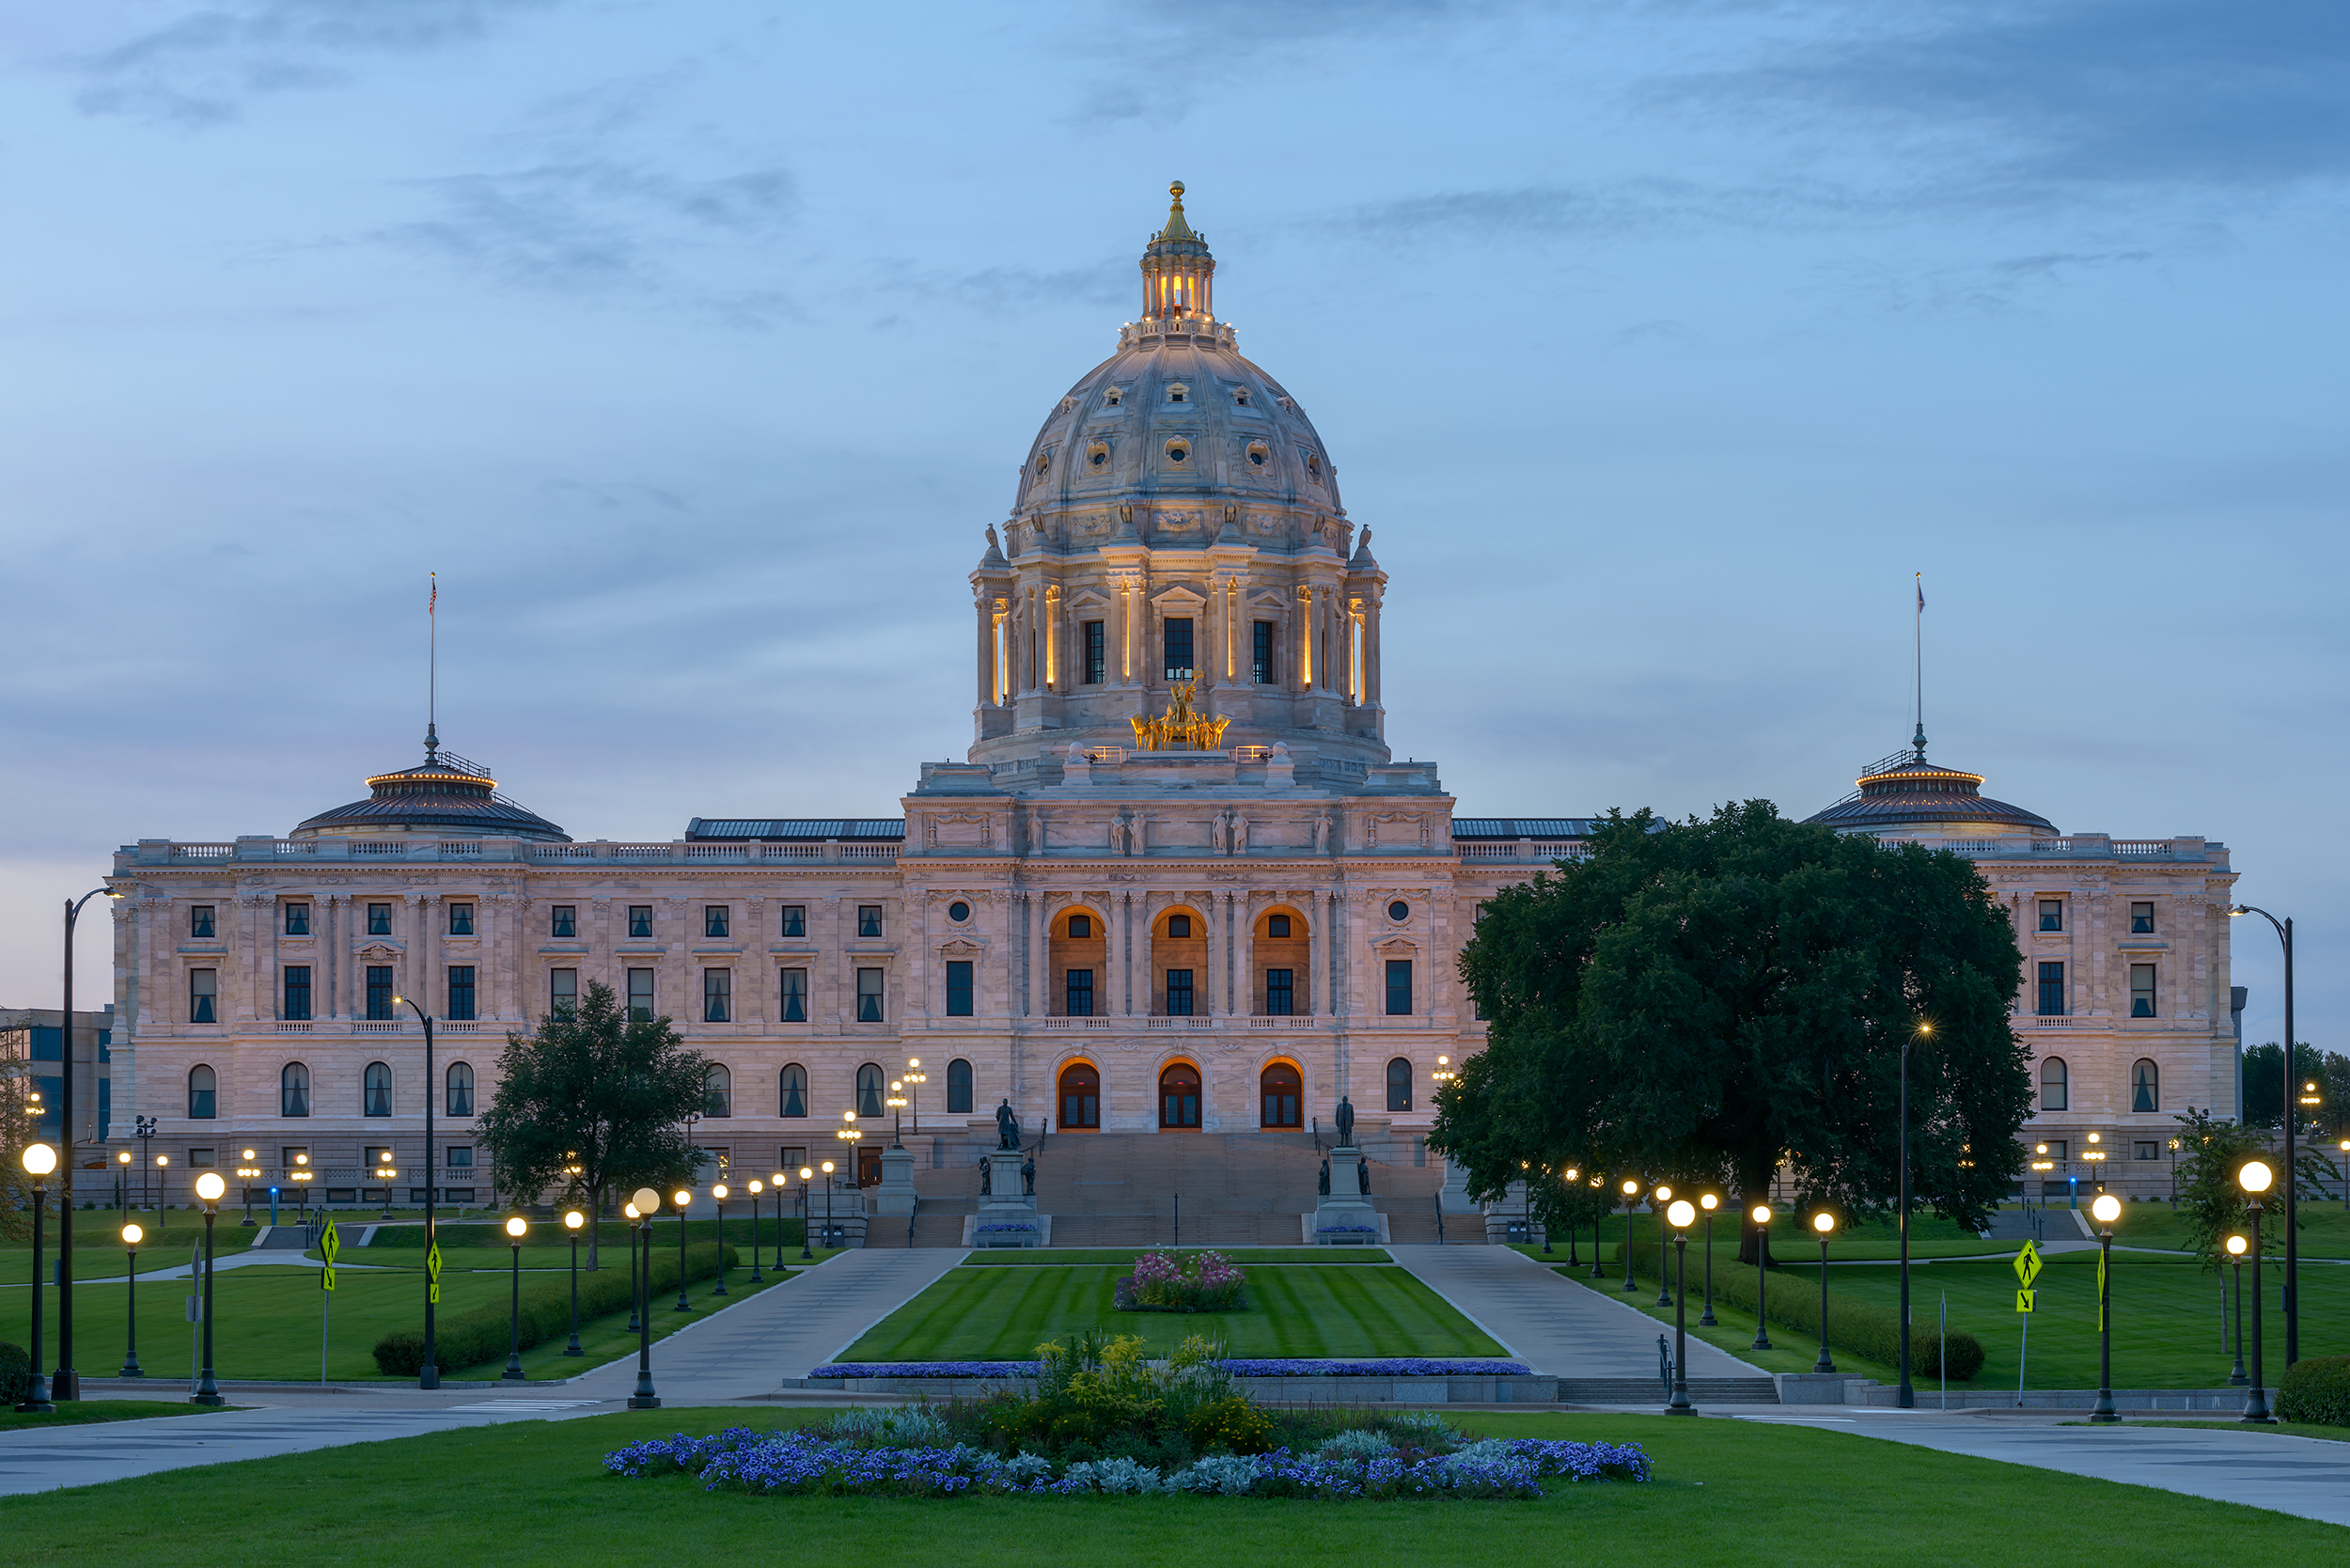 Facade of Minnesota Capitol Building with lights turned on